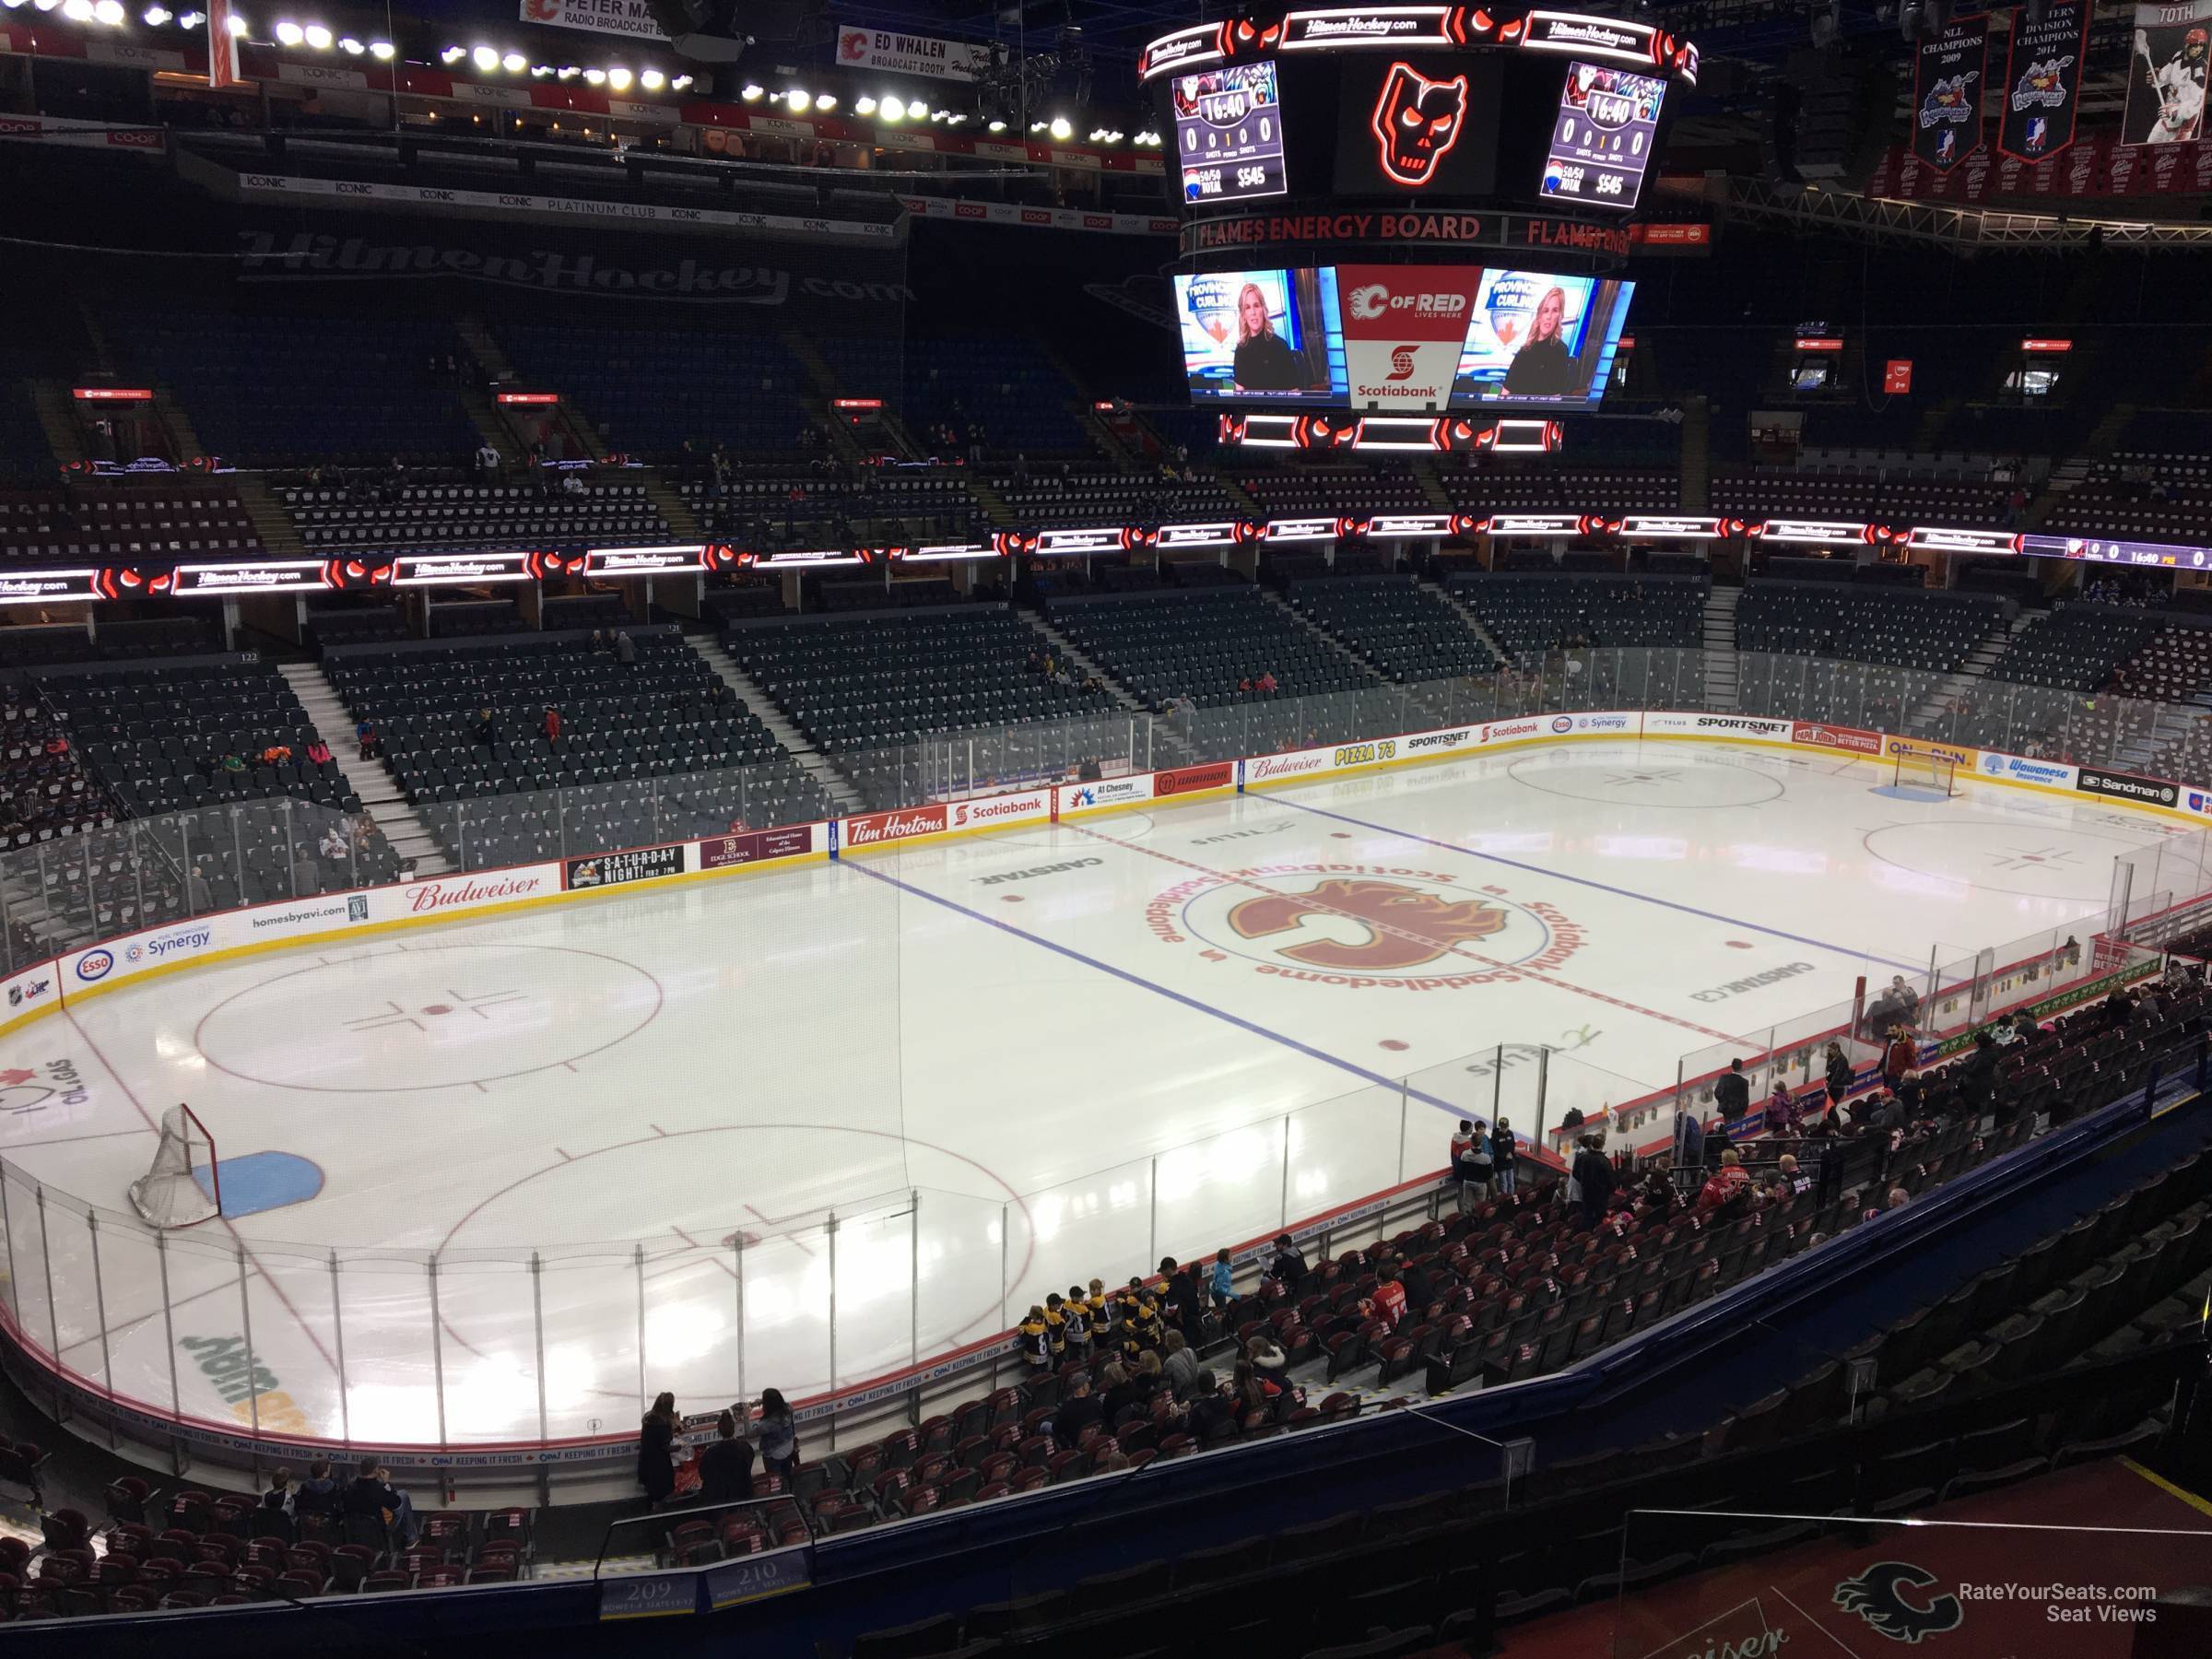 section 209, row 12 seat view  for hockey - scotiabank saddledome